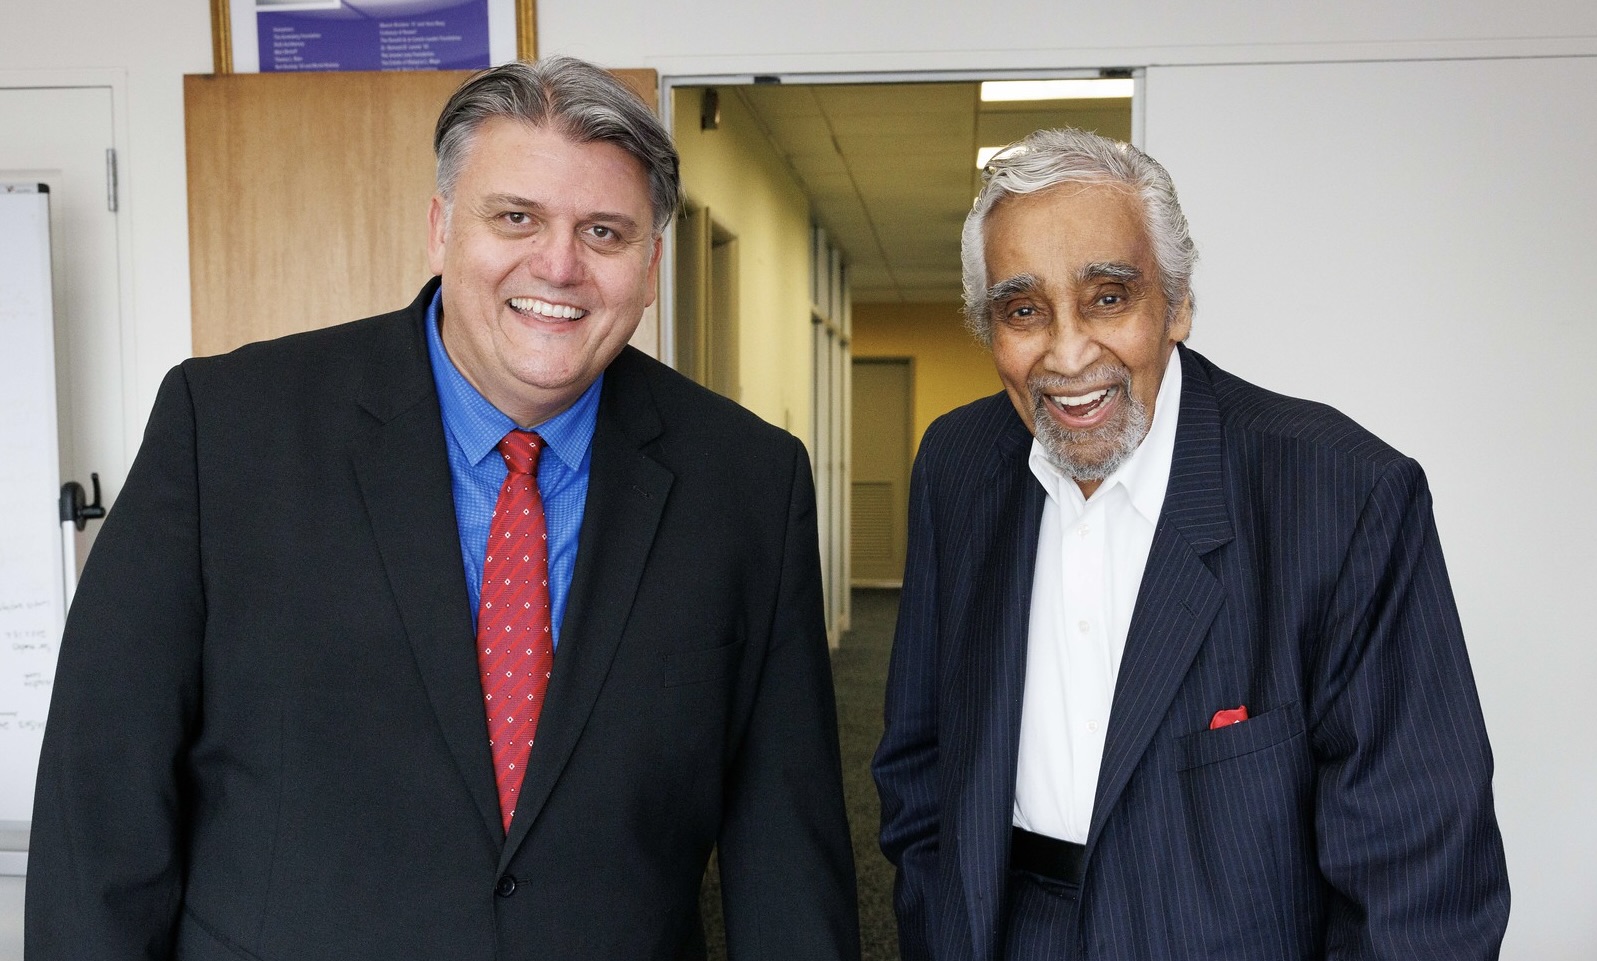 Executive Director Angelo Lampousis and the Honorable Charles Rangel